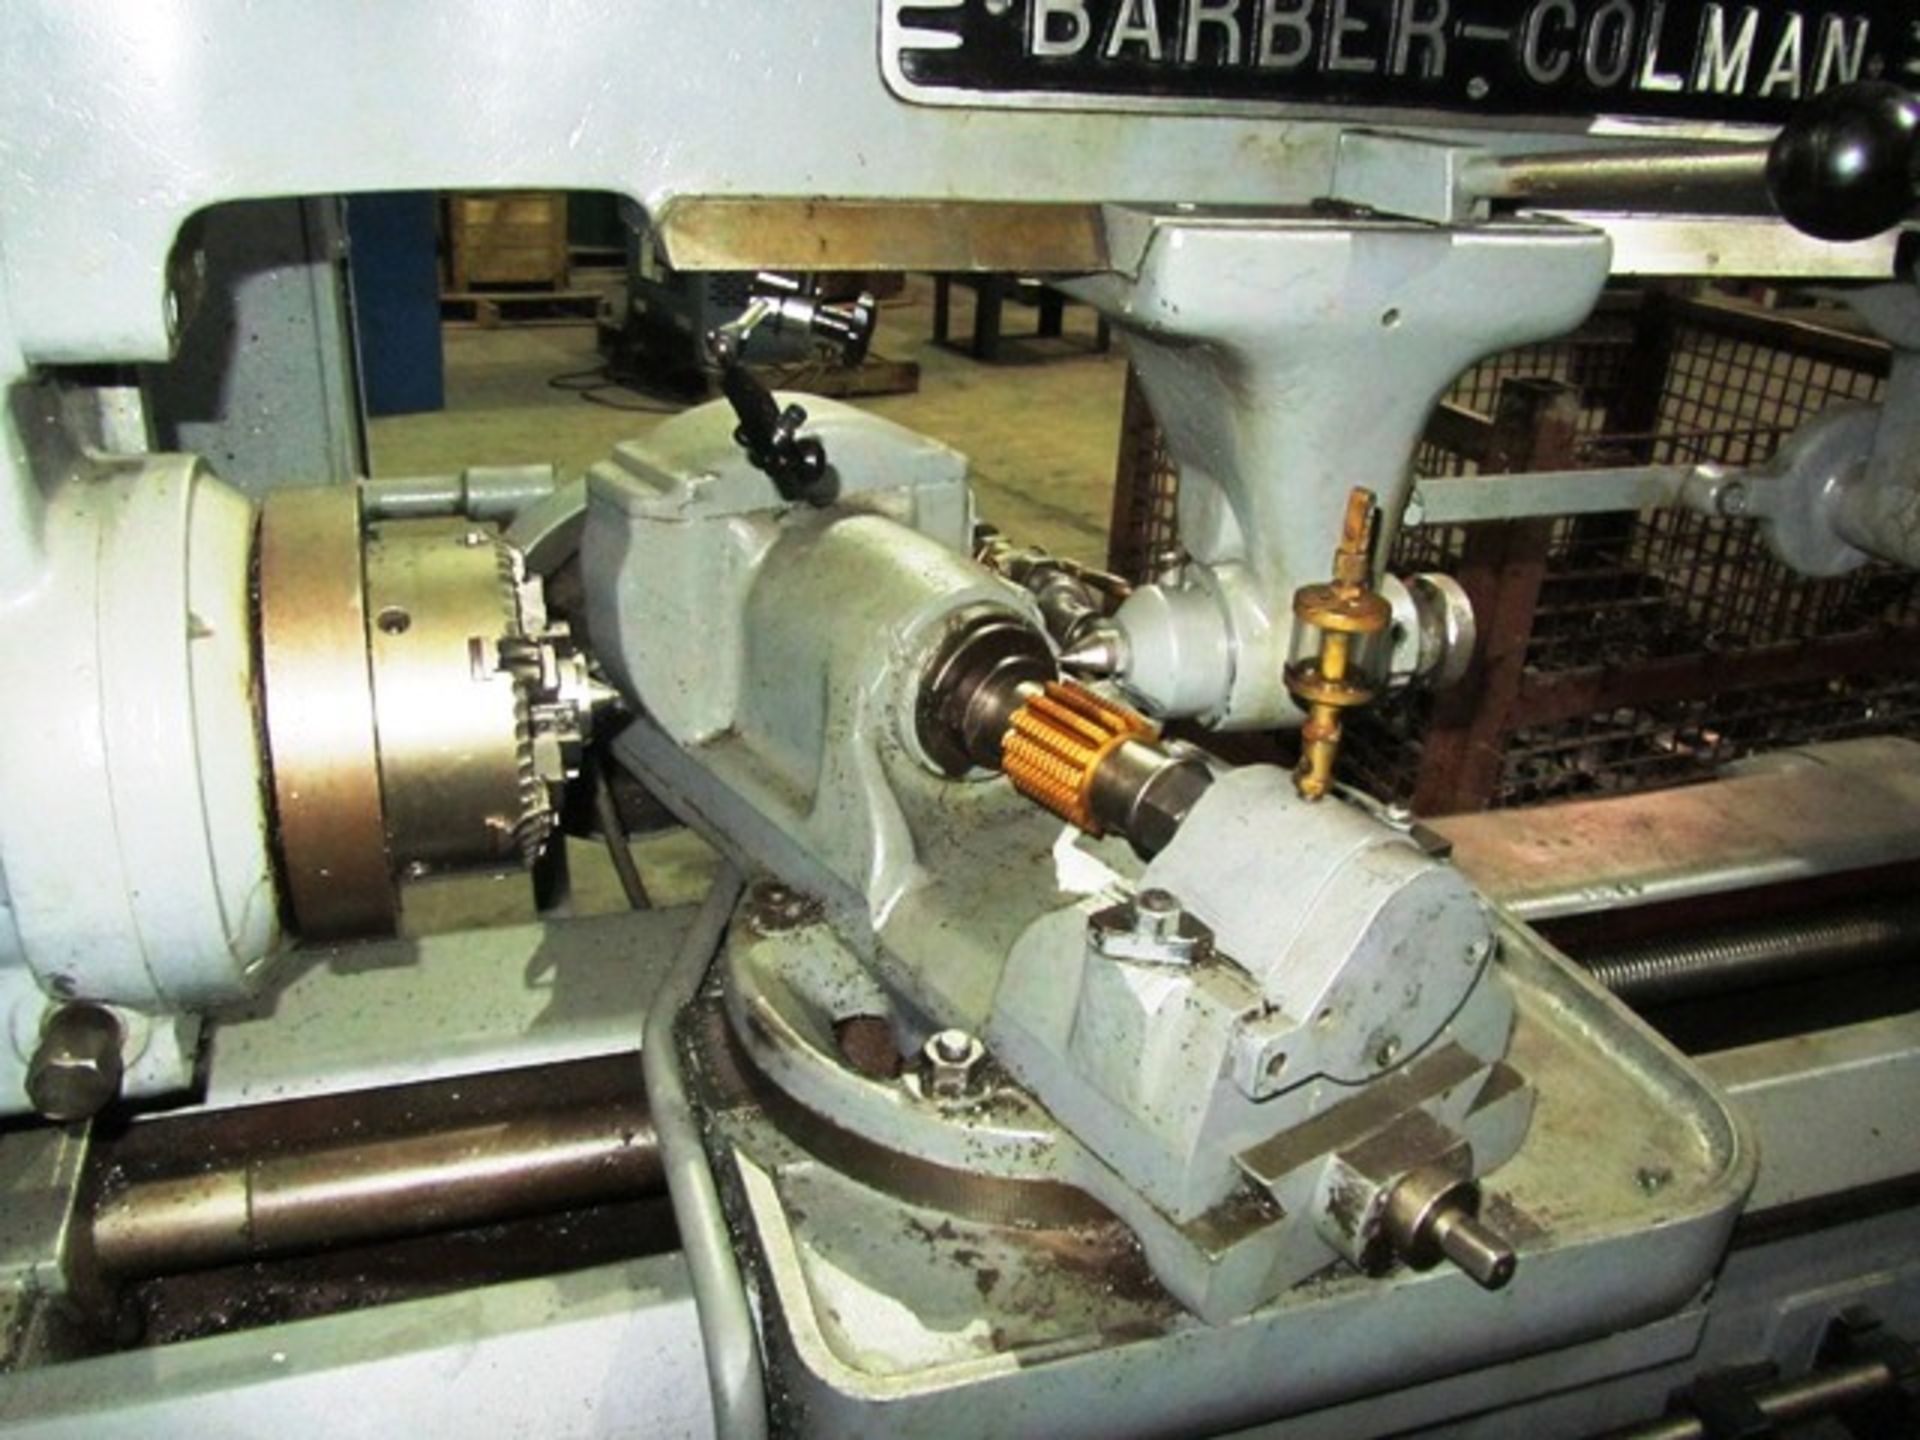 Barber-Colman #16-36 Horizontal Gear Hobber with Double Thread Index Worm, 6'' 6-Jaw Chuck, sn:3344 - Image 3 of 3